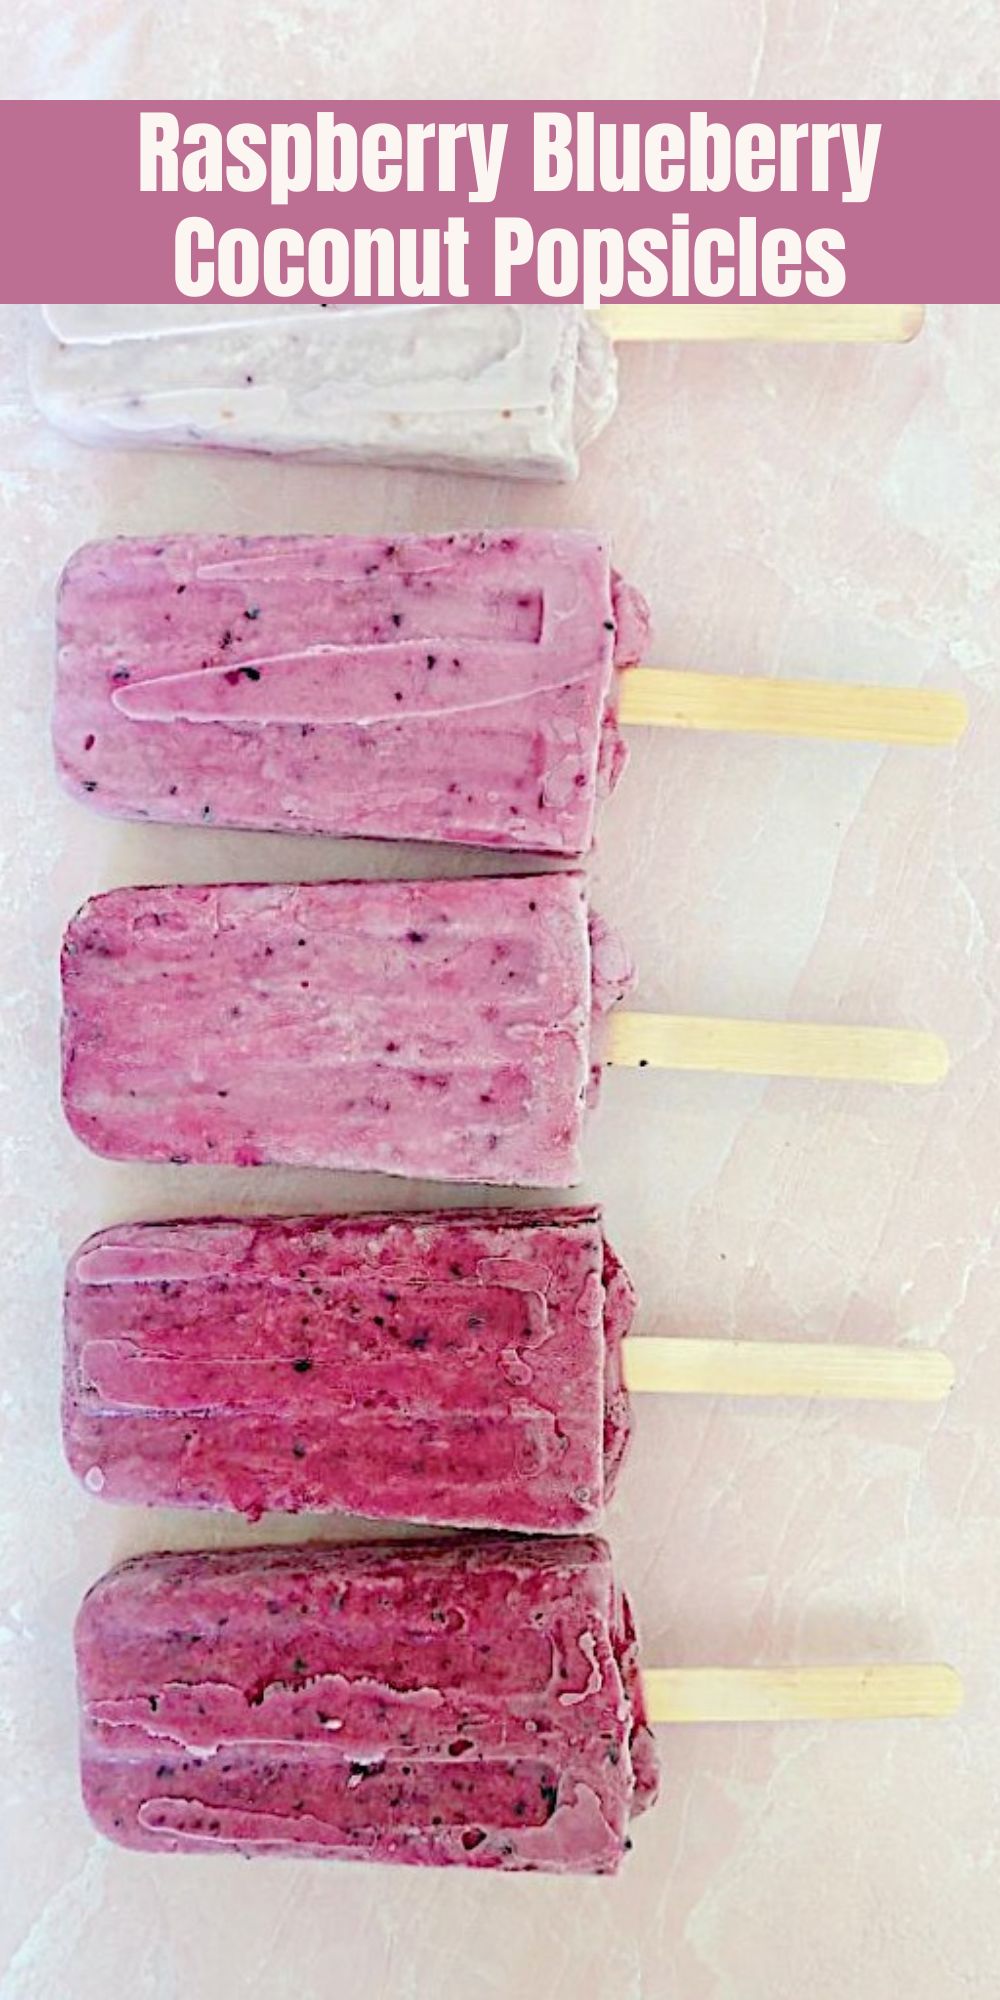 The weather is heating up so I made these Raspberry Blueberry Coconut Popsicles. They are healthy and the best popsicles!